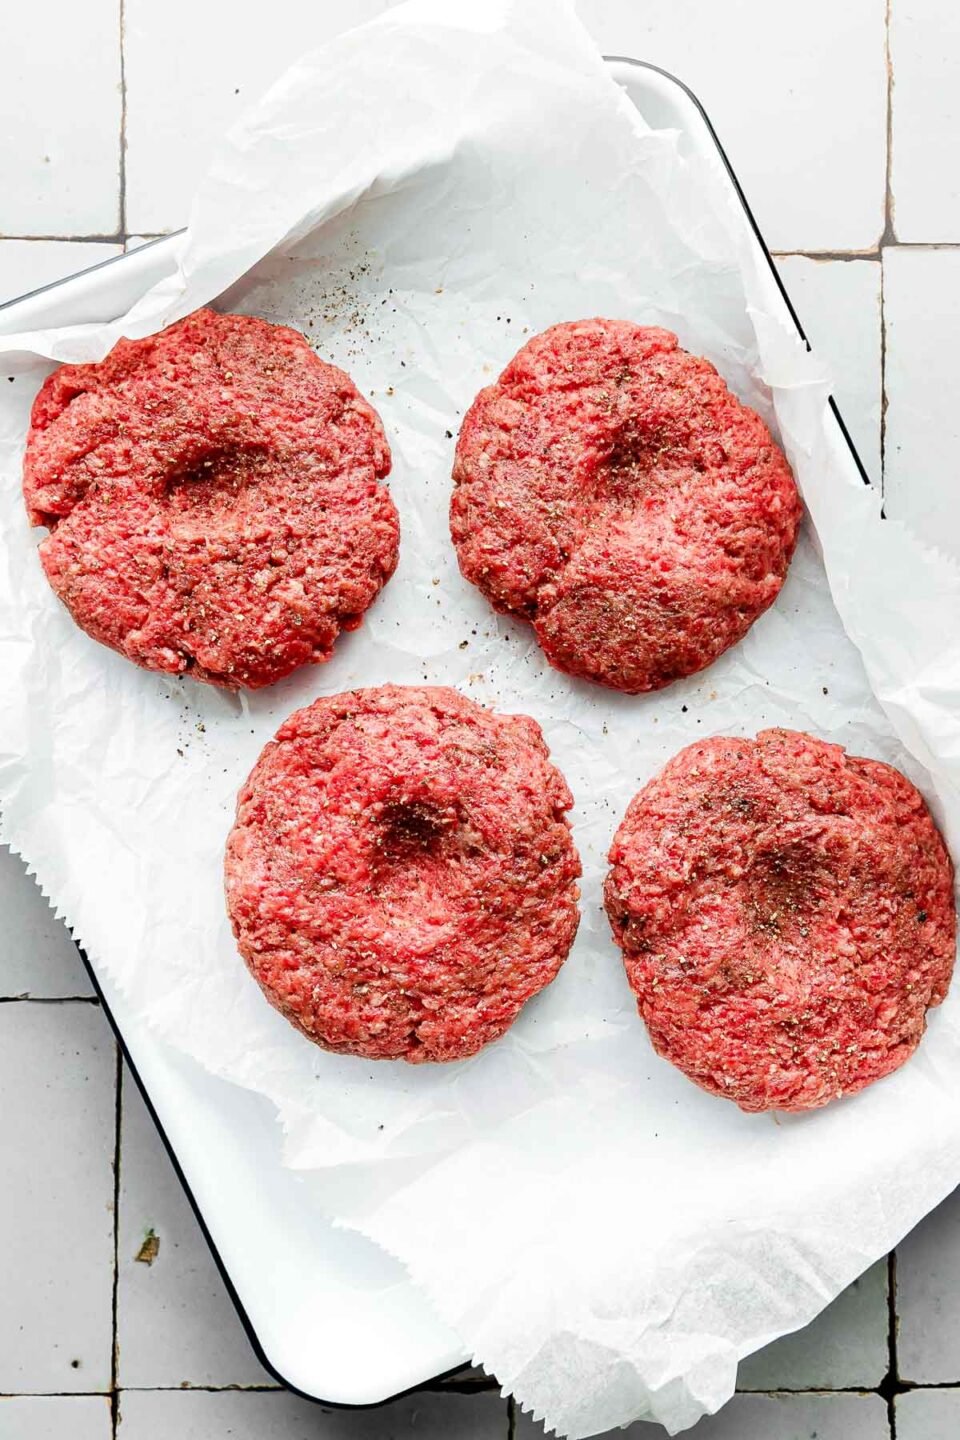 4 raw beef patties, each with an indent in the middle, rest on a parchment paper-lined sheet pan atop a grey tiled surface.